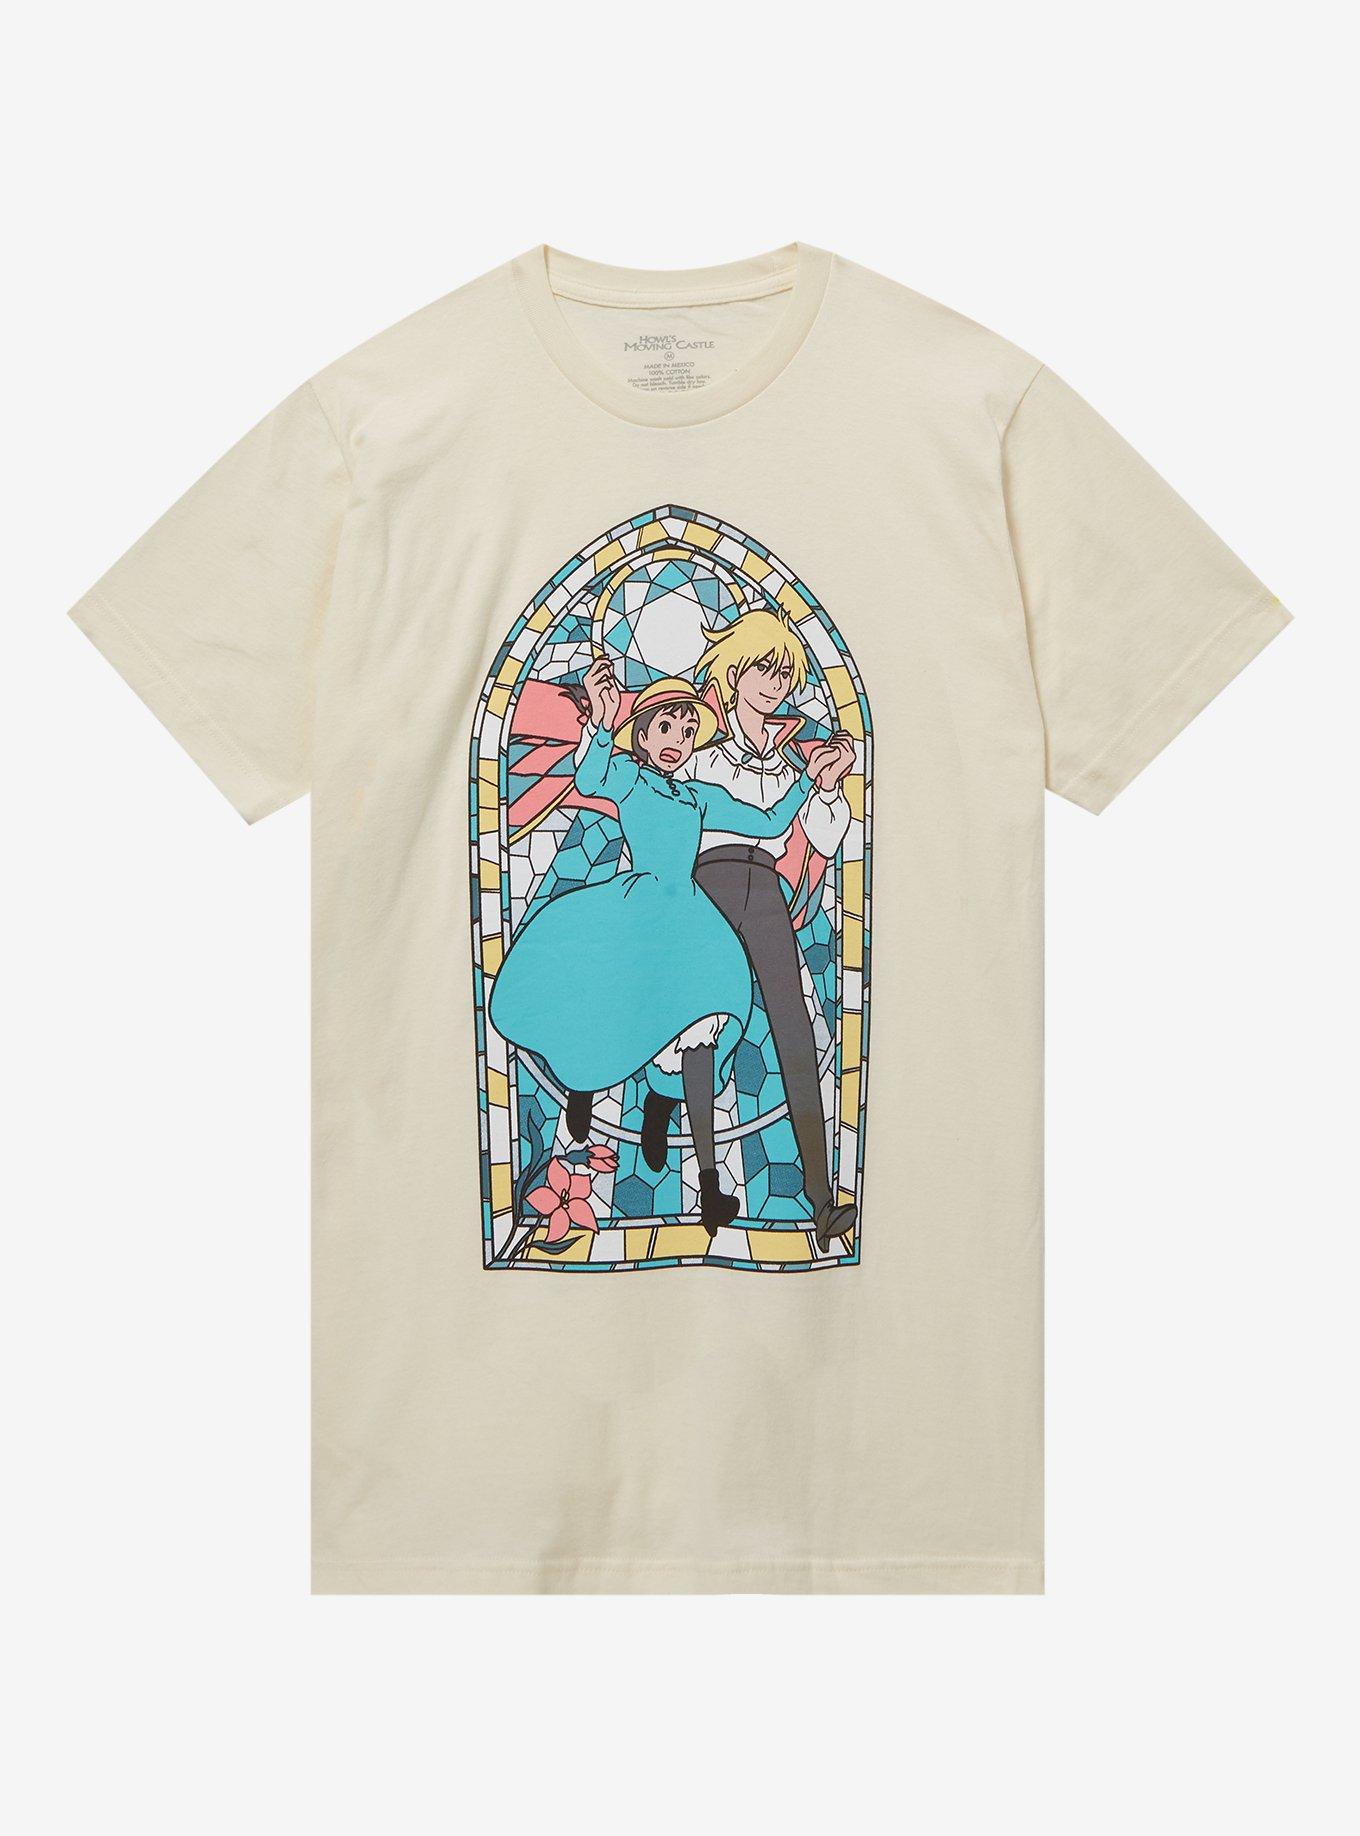 Studio Ghibli Howl's Moving Castle Duo Stained Glass Boyfriend Fit Girls T-Shirt, MULTI, hi-res